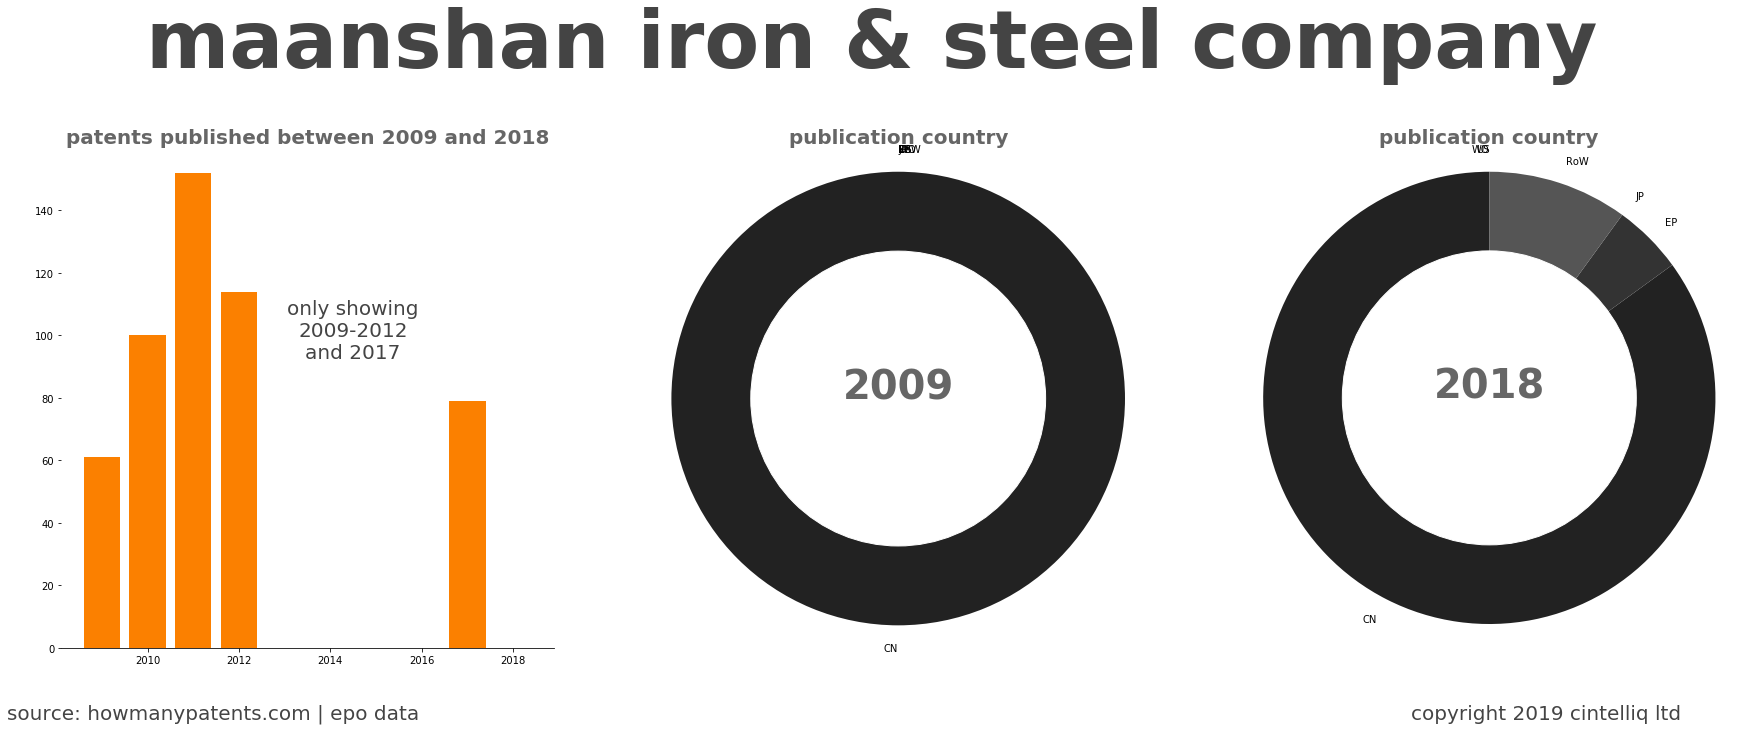 summary of patents for Maanshan Iron & Steel Company